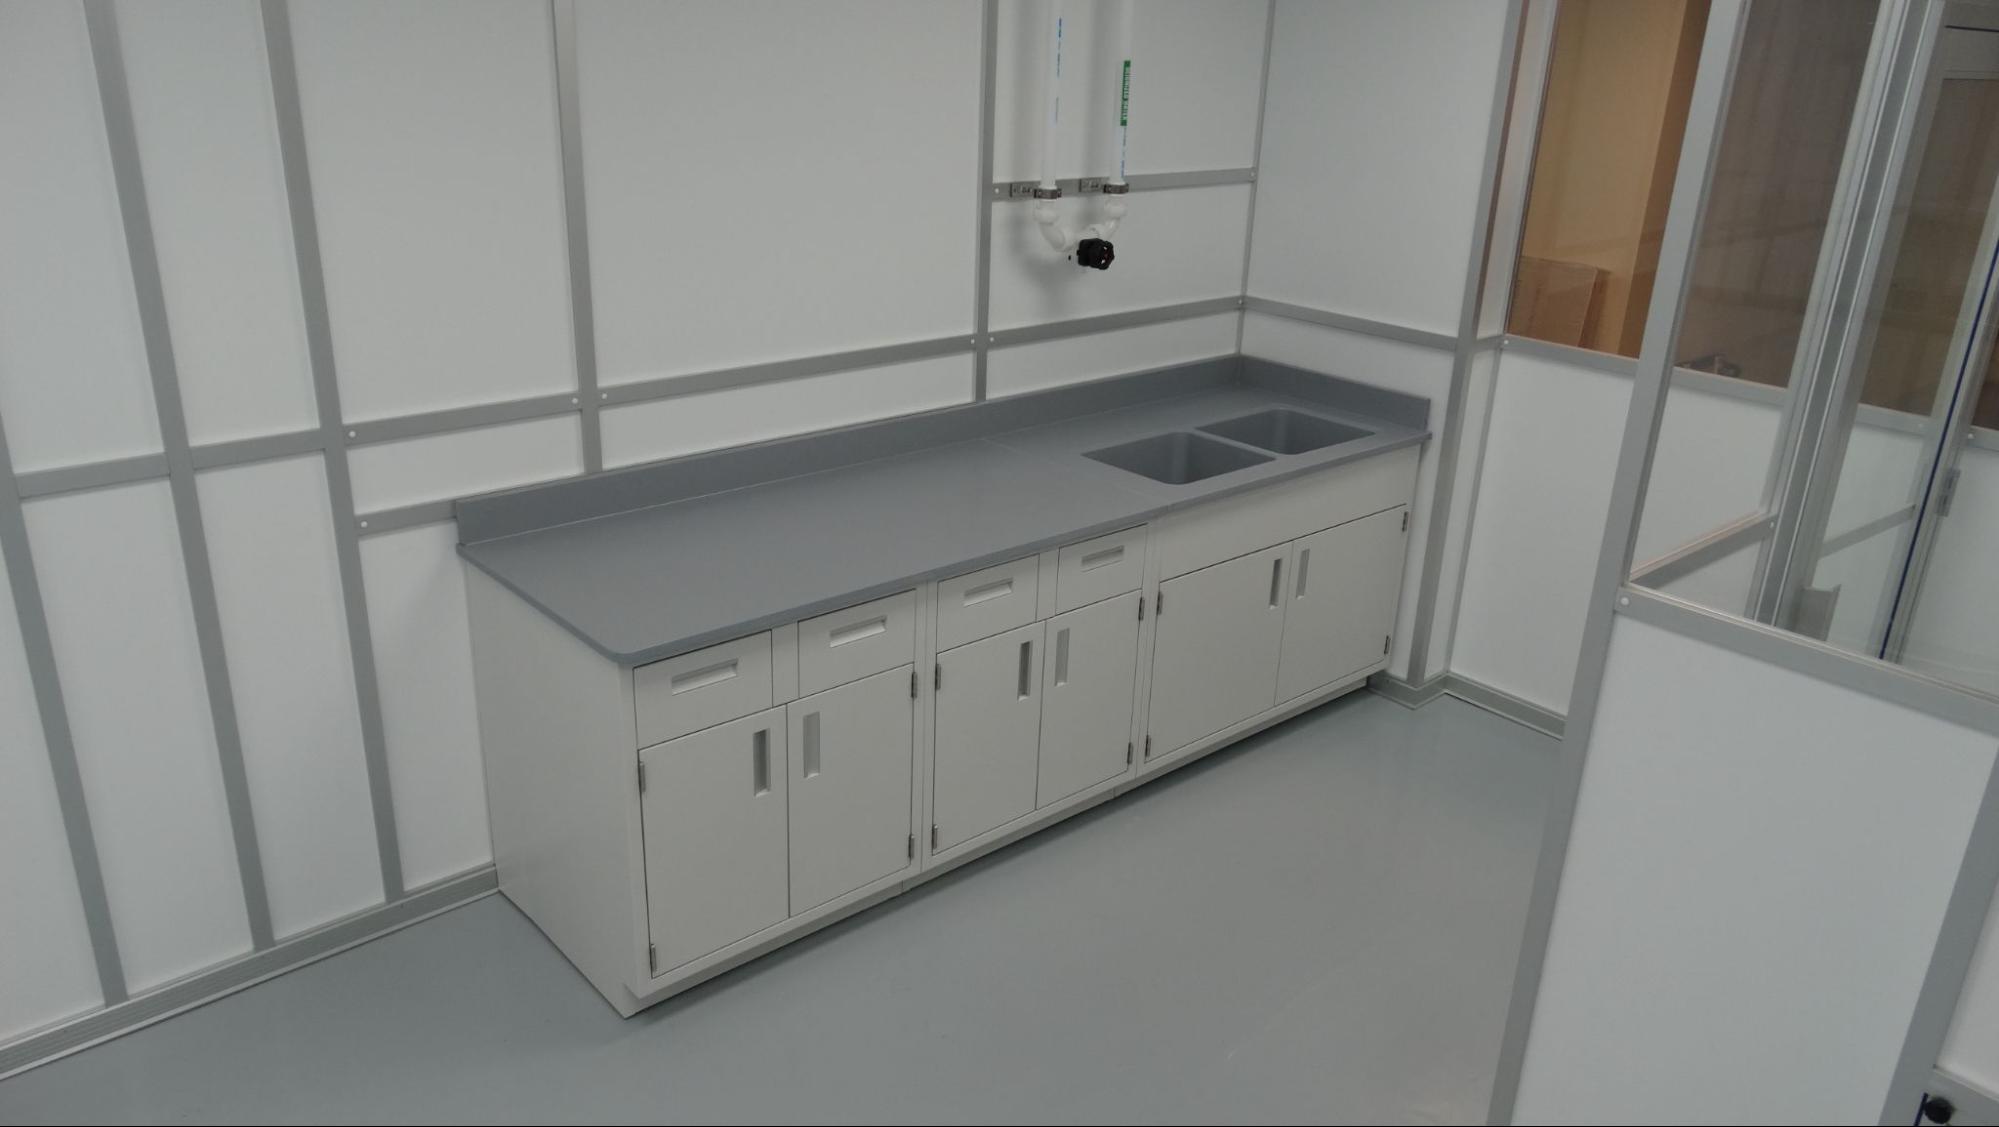 Sitting Height Lab Cabinetry